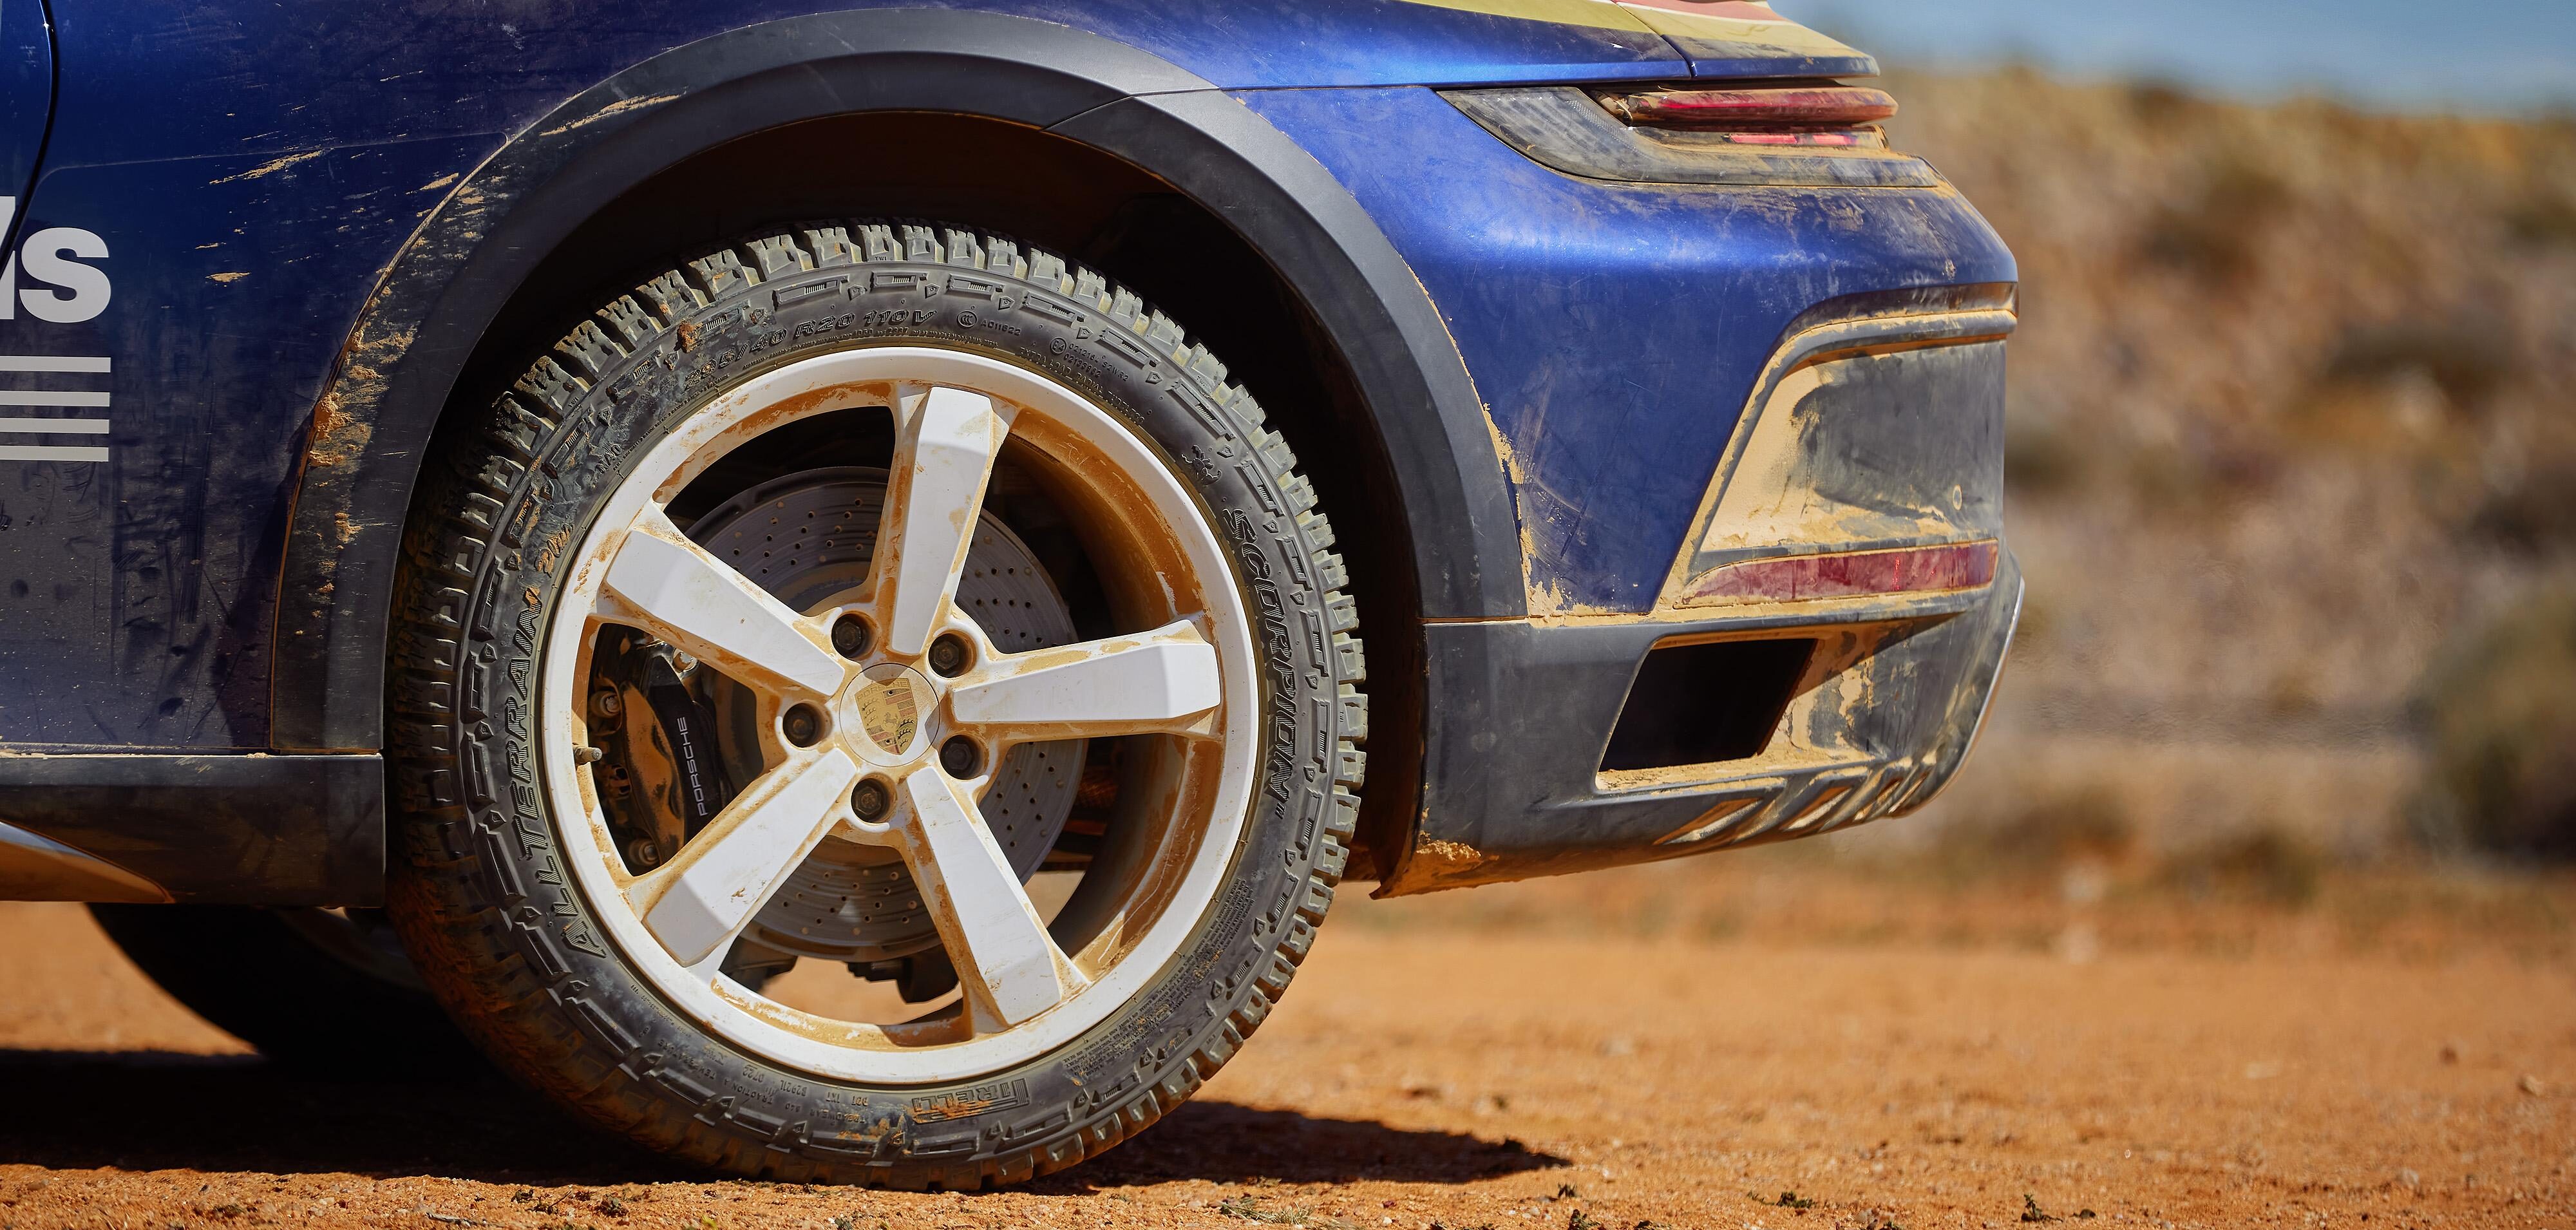 Porsche specifies off-road tire for on | International Technology 911 Tire the model time first